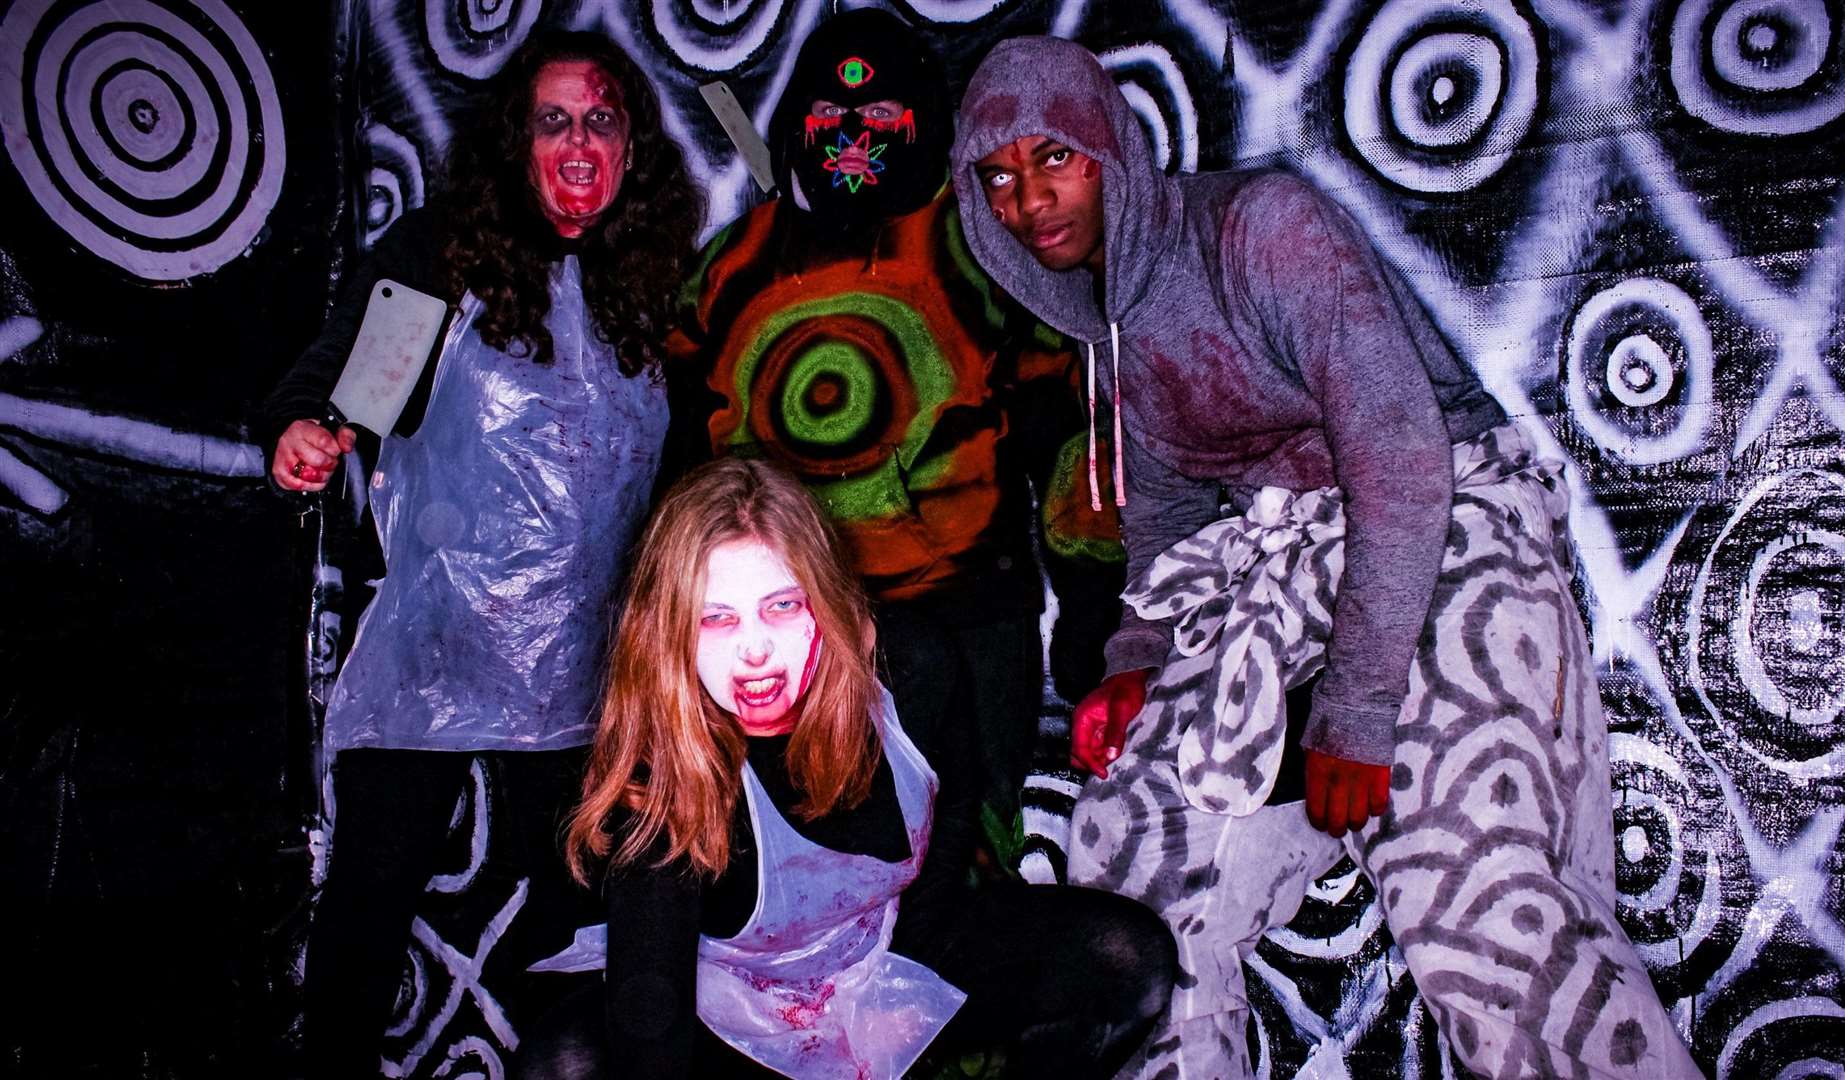 Fort Amherst Halloween Horrors are back